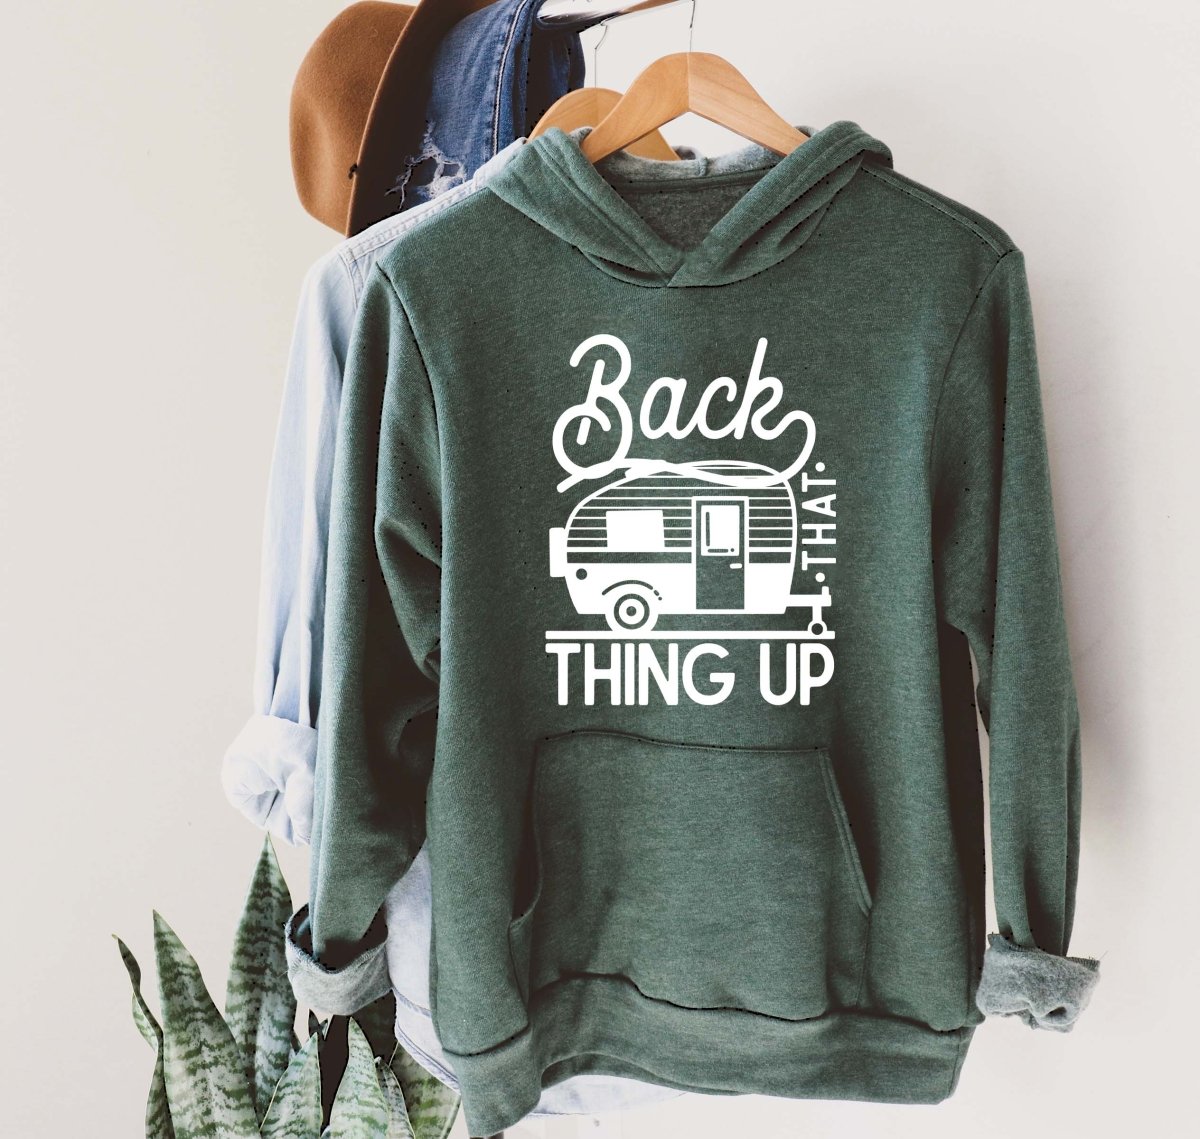 Back That Thing Up (white) Hooded Sweatshirt - Limeberry Designs